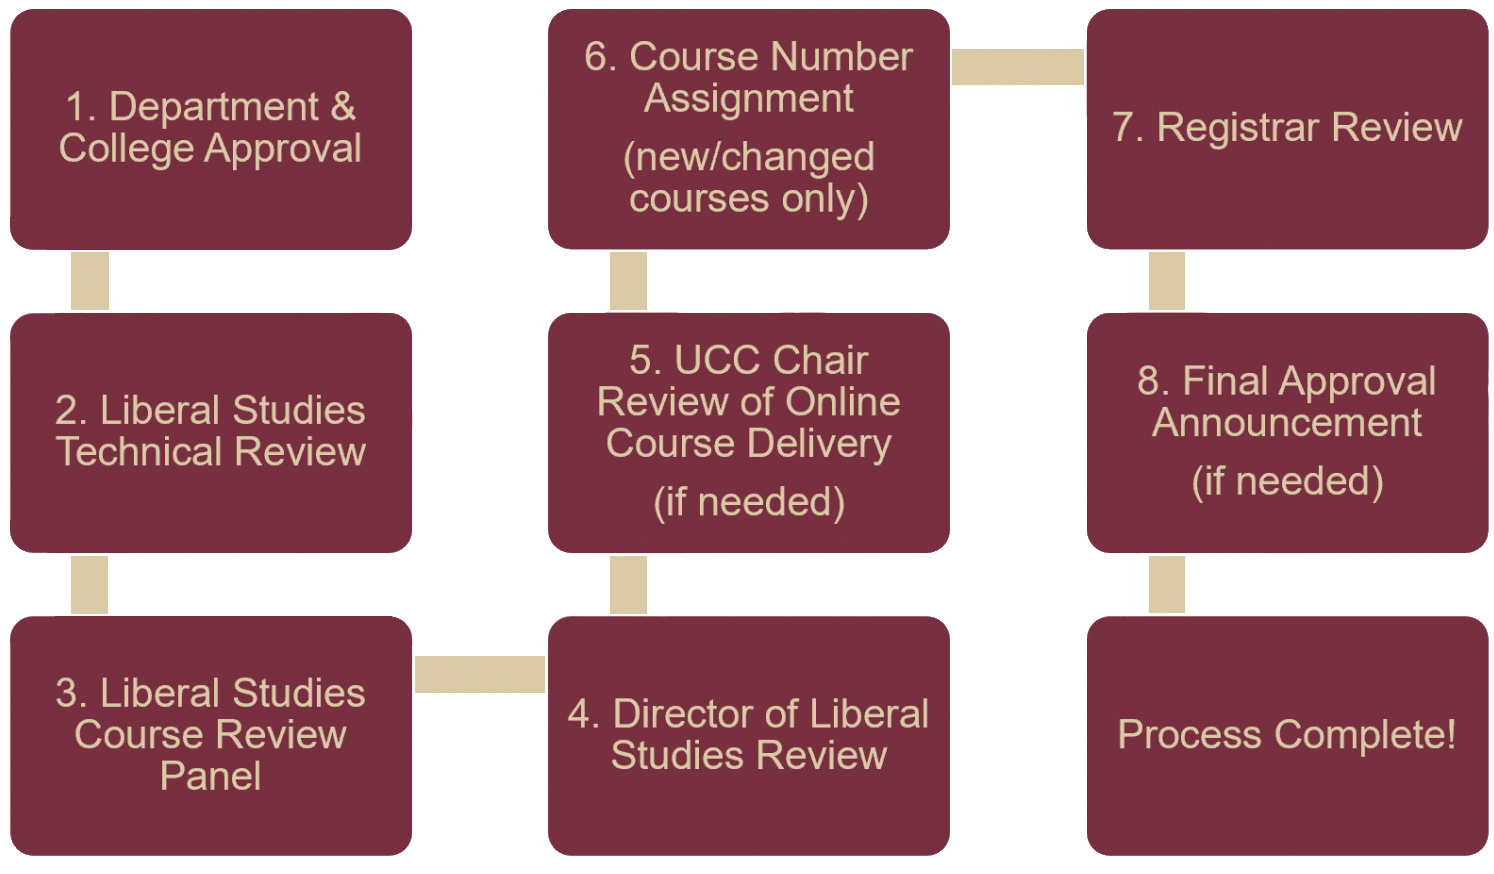 "An image of the Liberal Studies Approval Flowchart with the following steps: 1. Department & College Approval 2. Liberal Studies Technical Review 3. Liberal Studies Course Review Panel 4. Director of Liberal Studies Review 5. UCC Chair Review of Online Delivery 6. Course Number Assignment 7. Registrar Review 8. Final Approval Announcement 9. Process Complete"